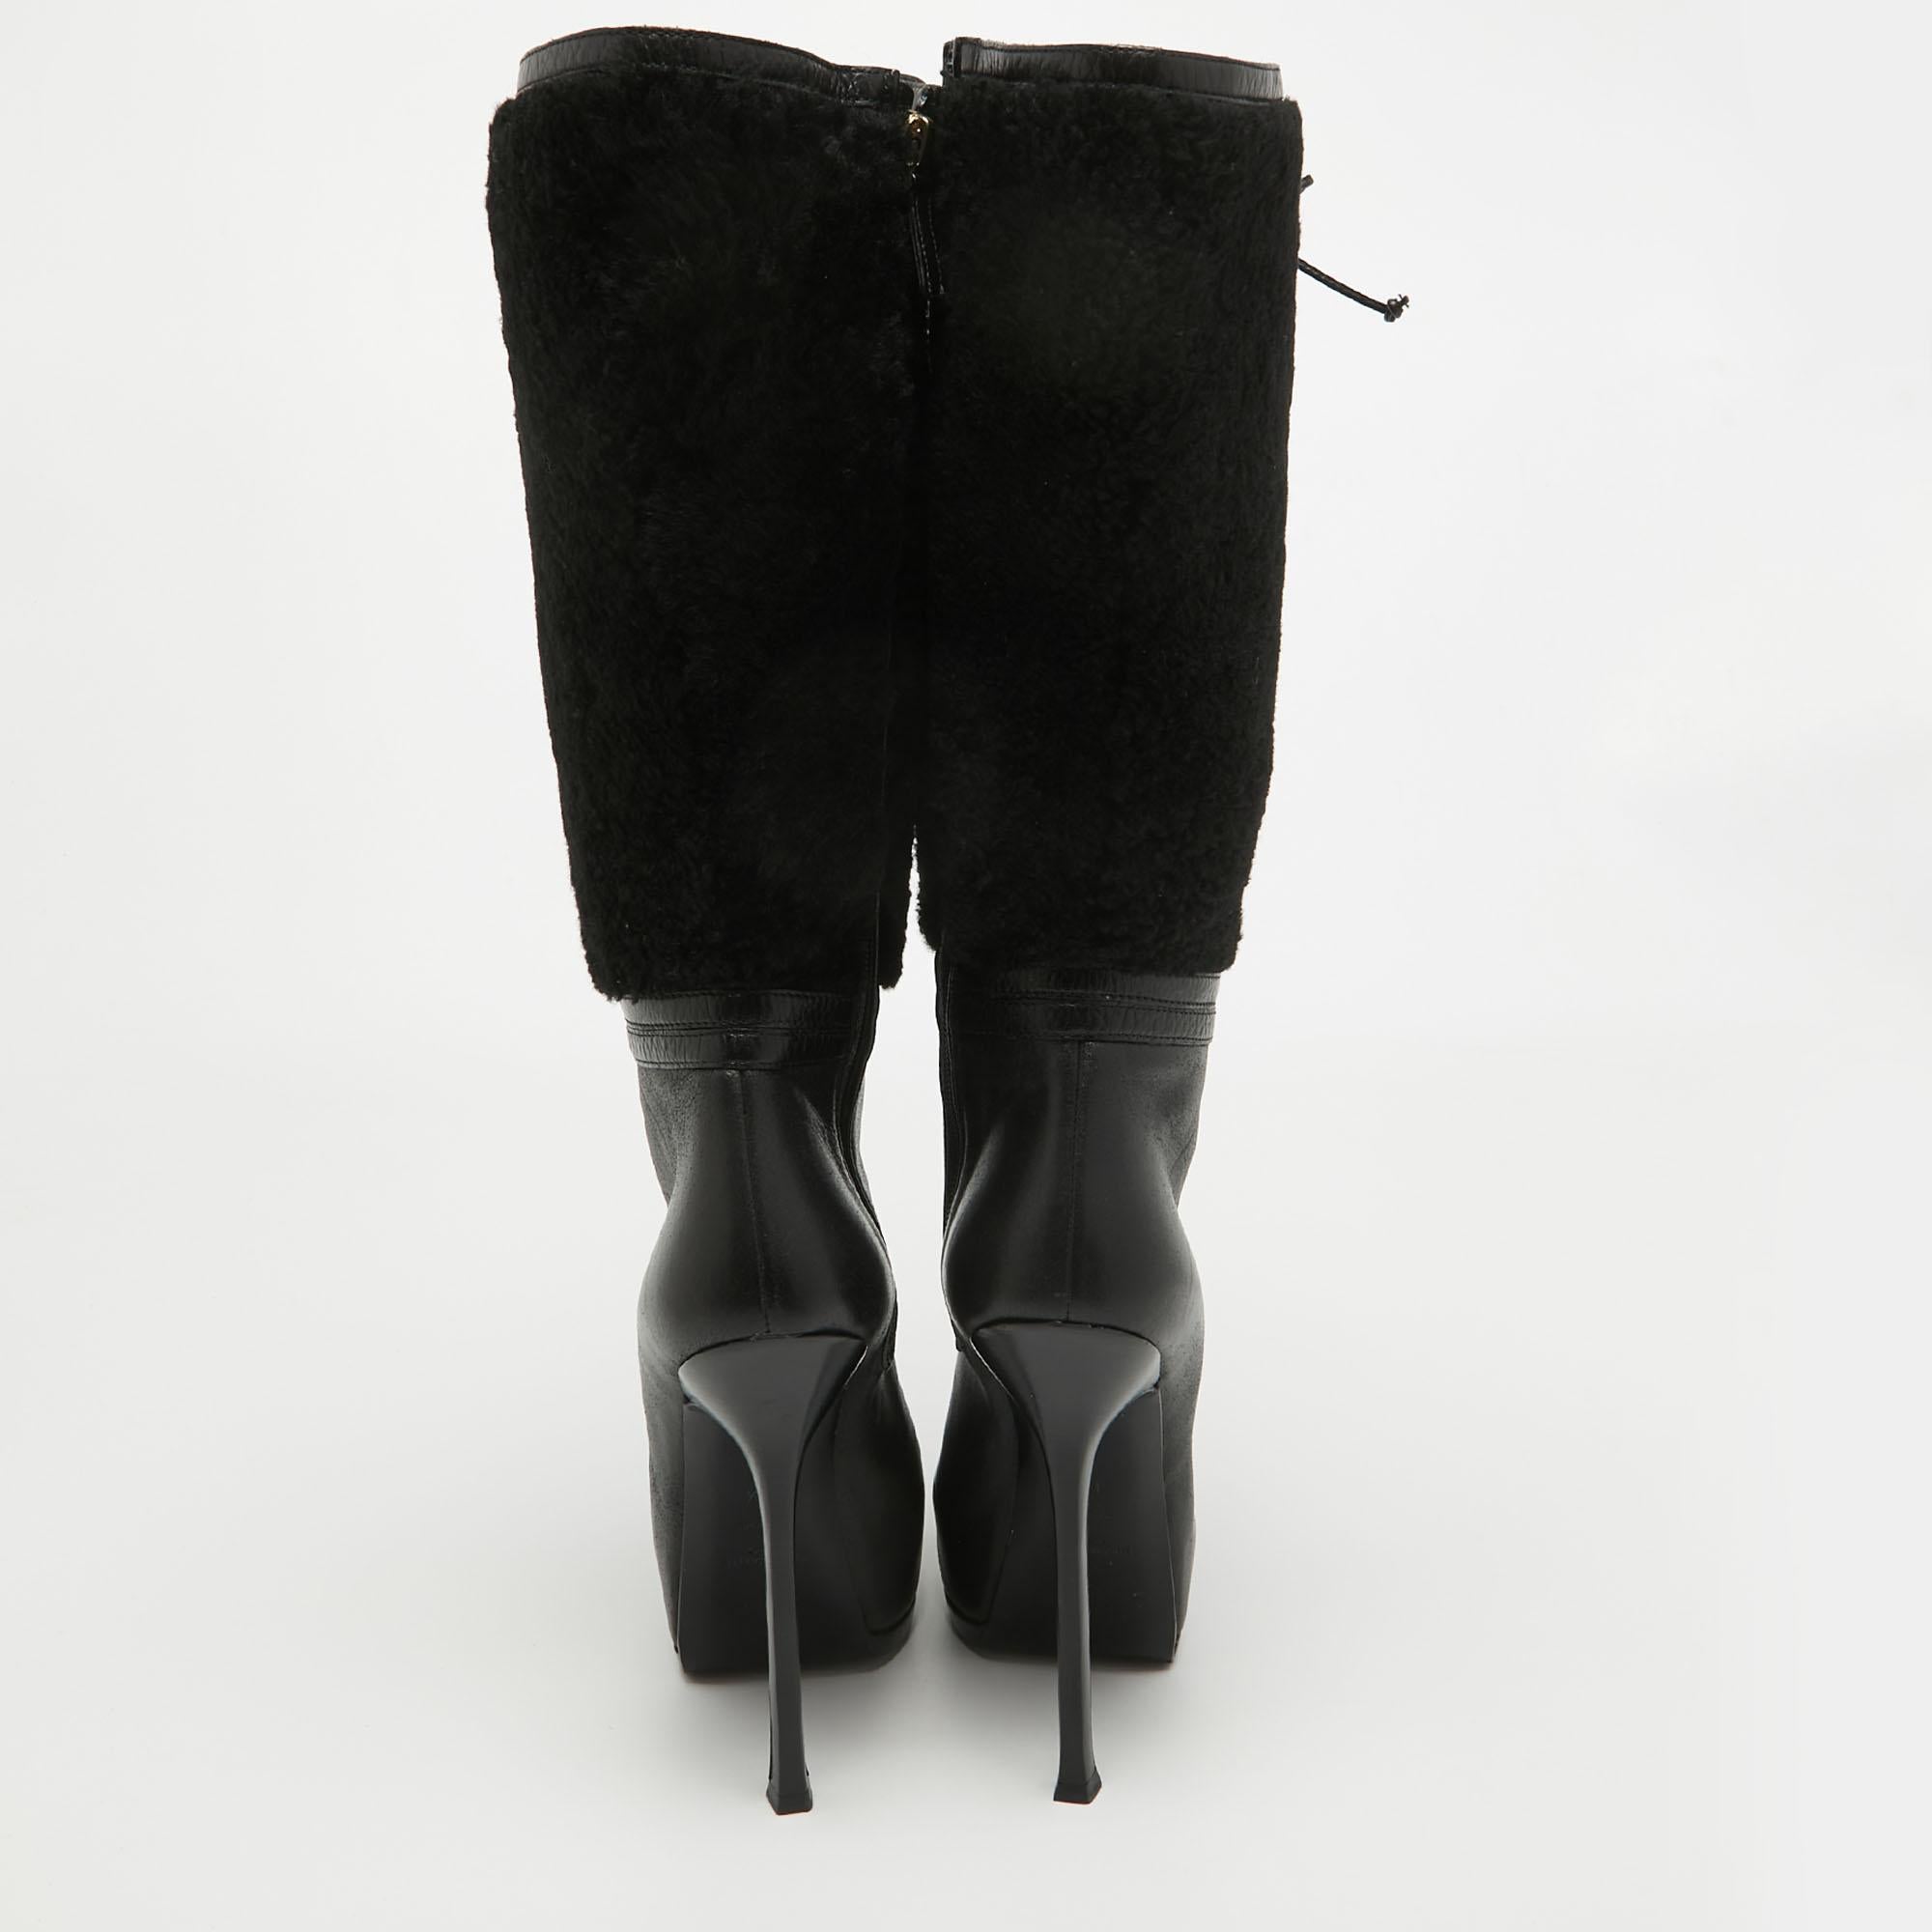 Yves Saint Laurent Black Leather and Wool Platform Mid Calf Boots Size 39.5 For Sale 2